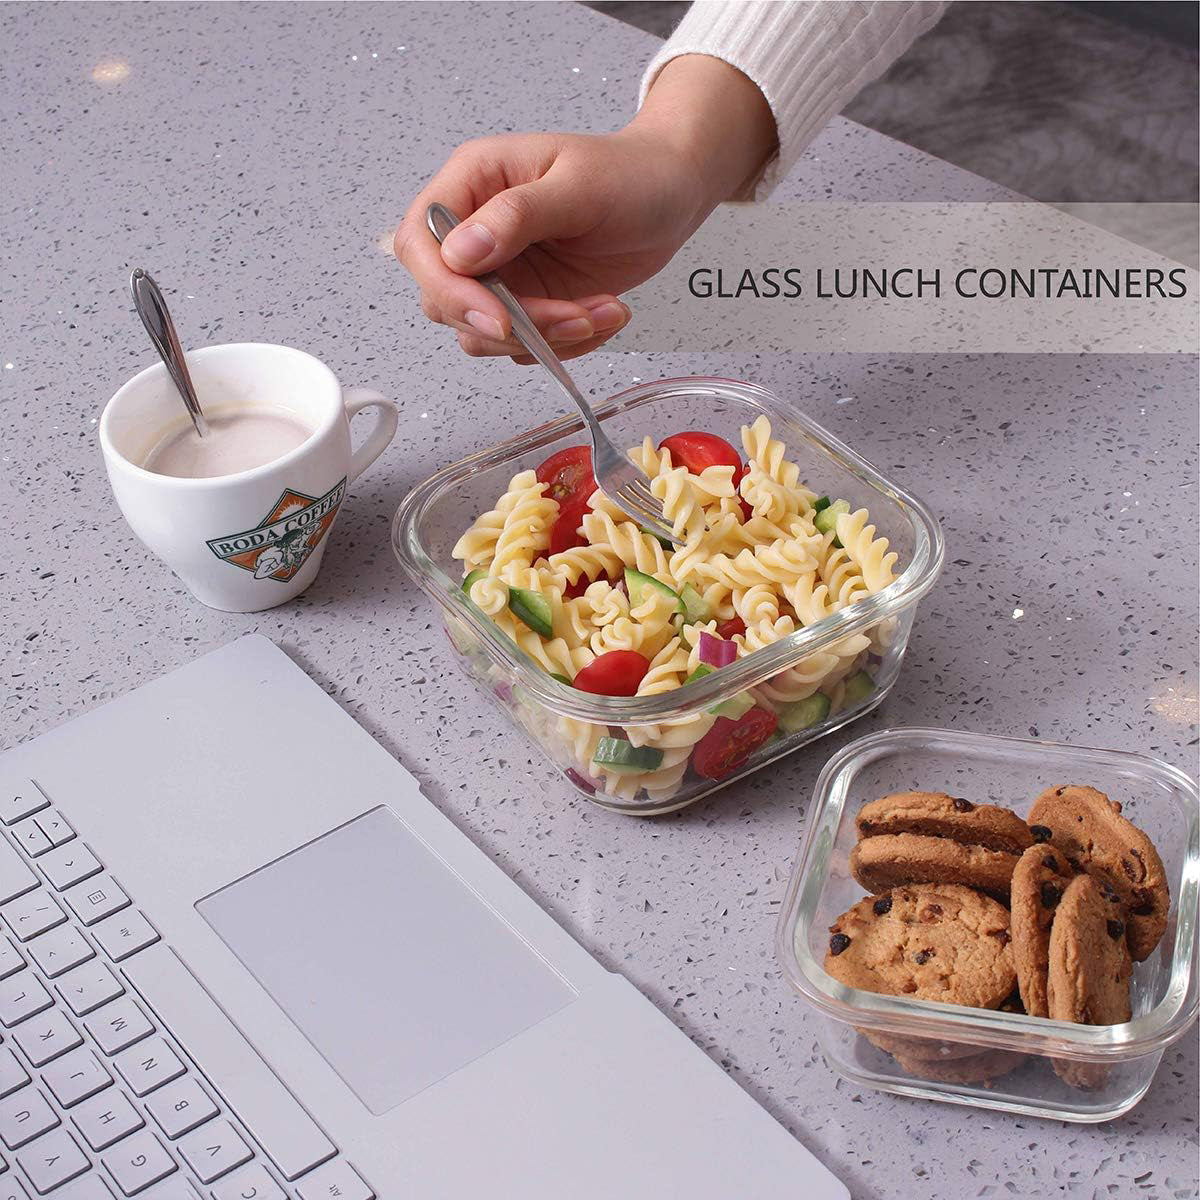 18pc Glass Container Set With Lock Tight Lids - BPA Free, Leak Proof